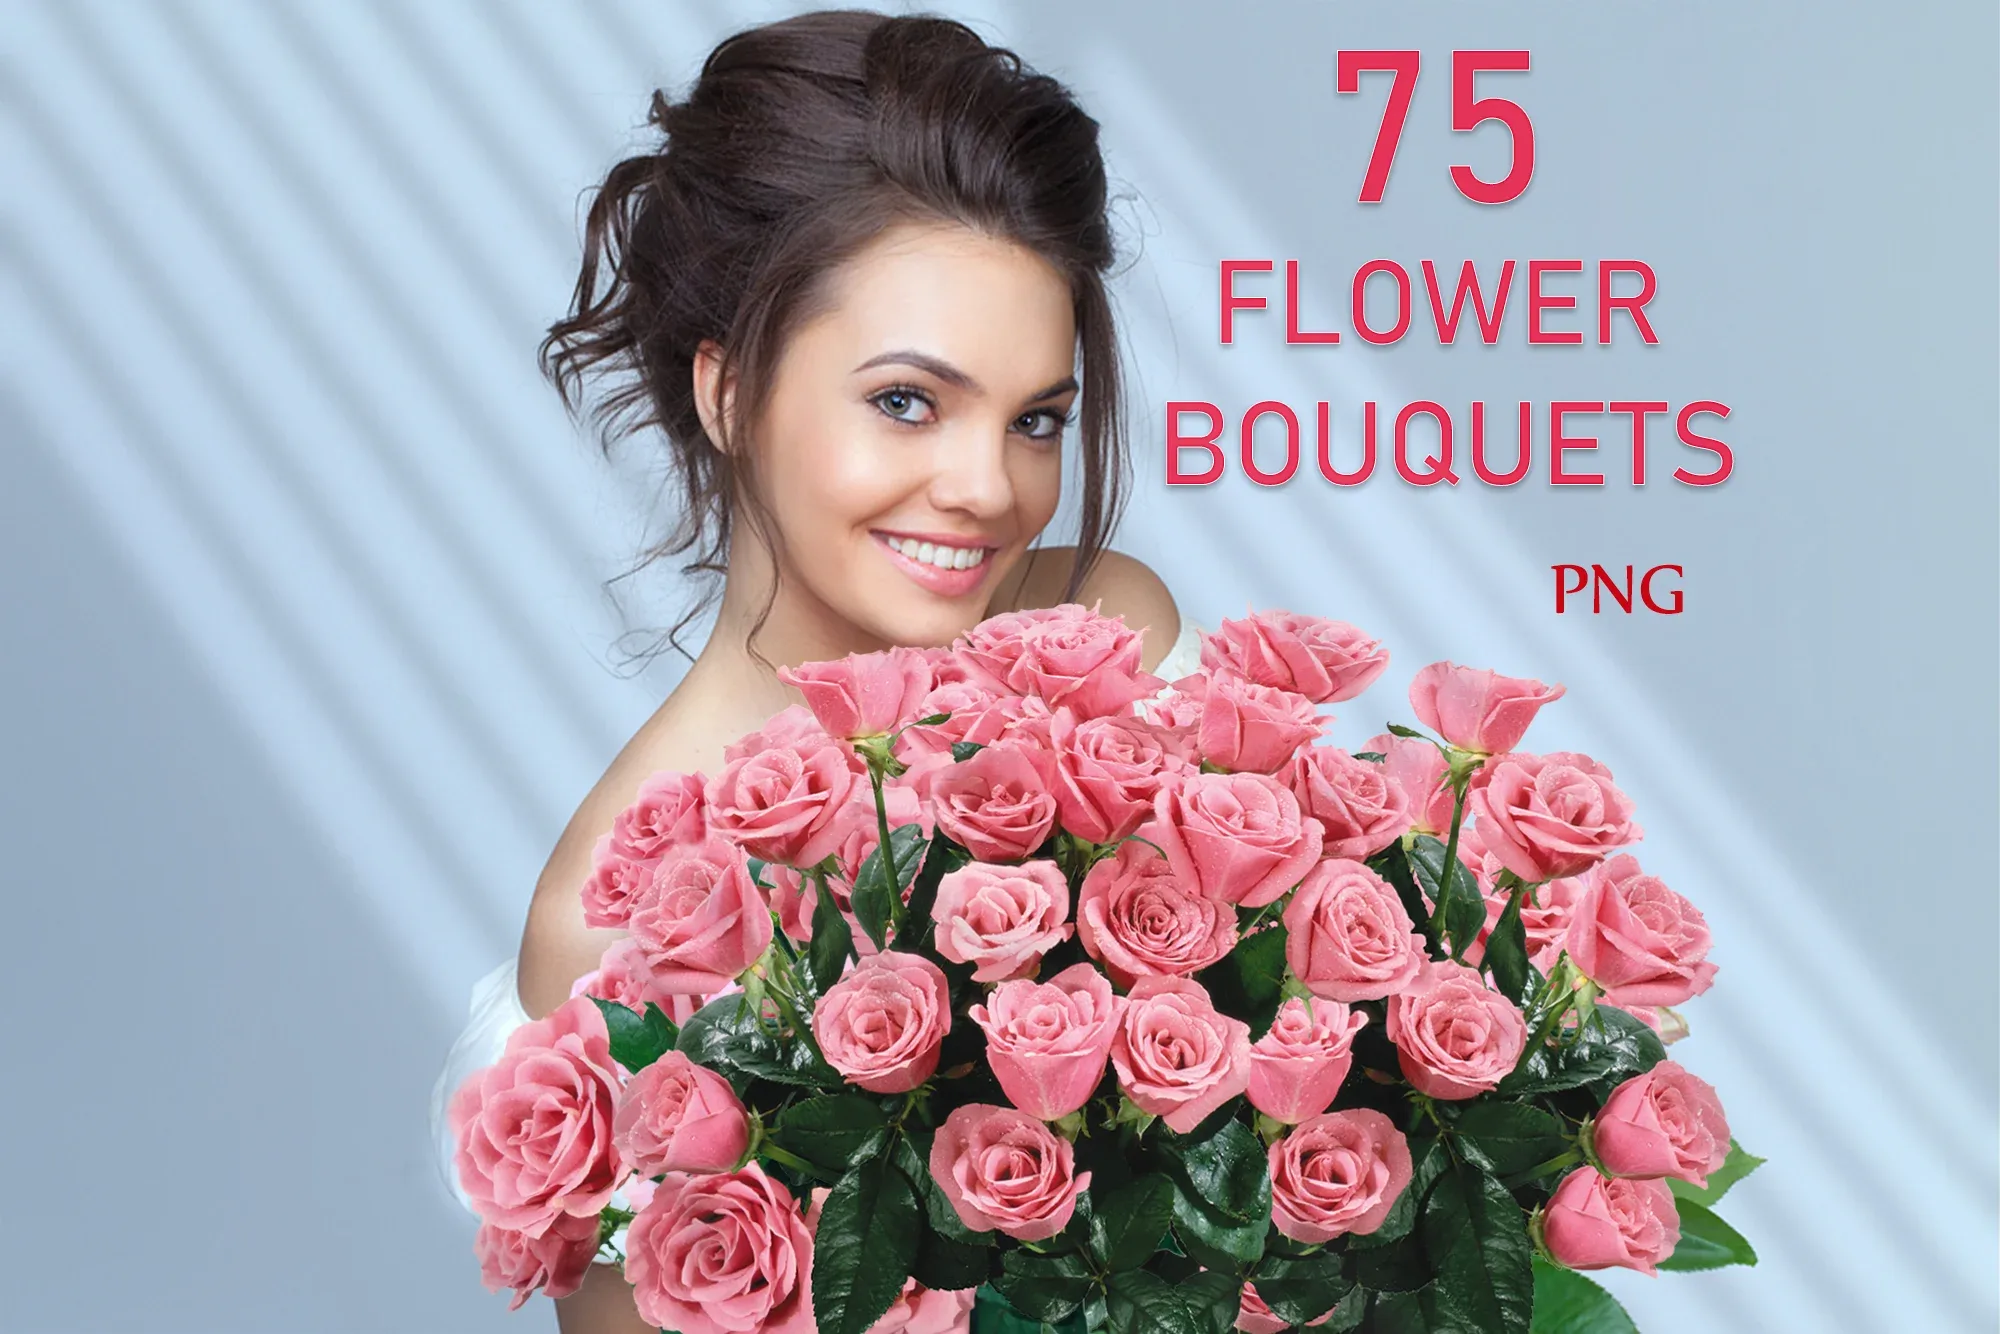 75 Flower Bouquets, Digital Spring Bouquet, Rose flower Clip Art, Floral season, Tulip real flowers, Snowdrop Photoshop overlays, PNG files